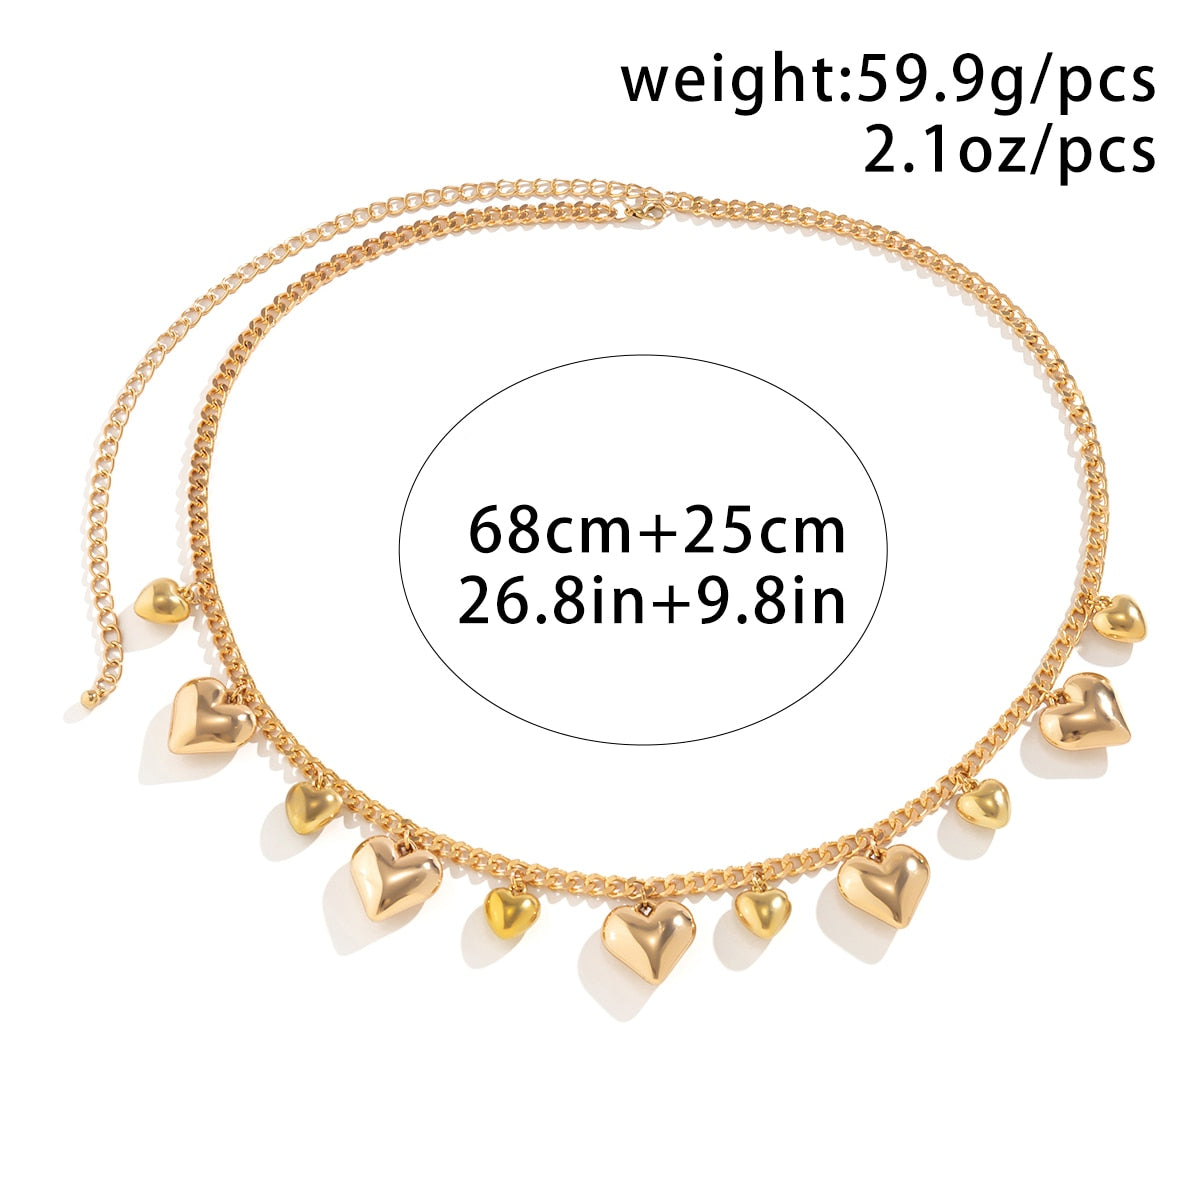 Maytrends Punk Irregular Heart Shaped Pendant Waist Chain Women Trend Hip Hop Heavy Metal Chain Belly Body Sexy Aesthetic Jewelry